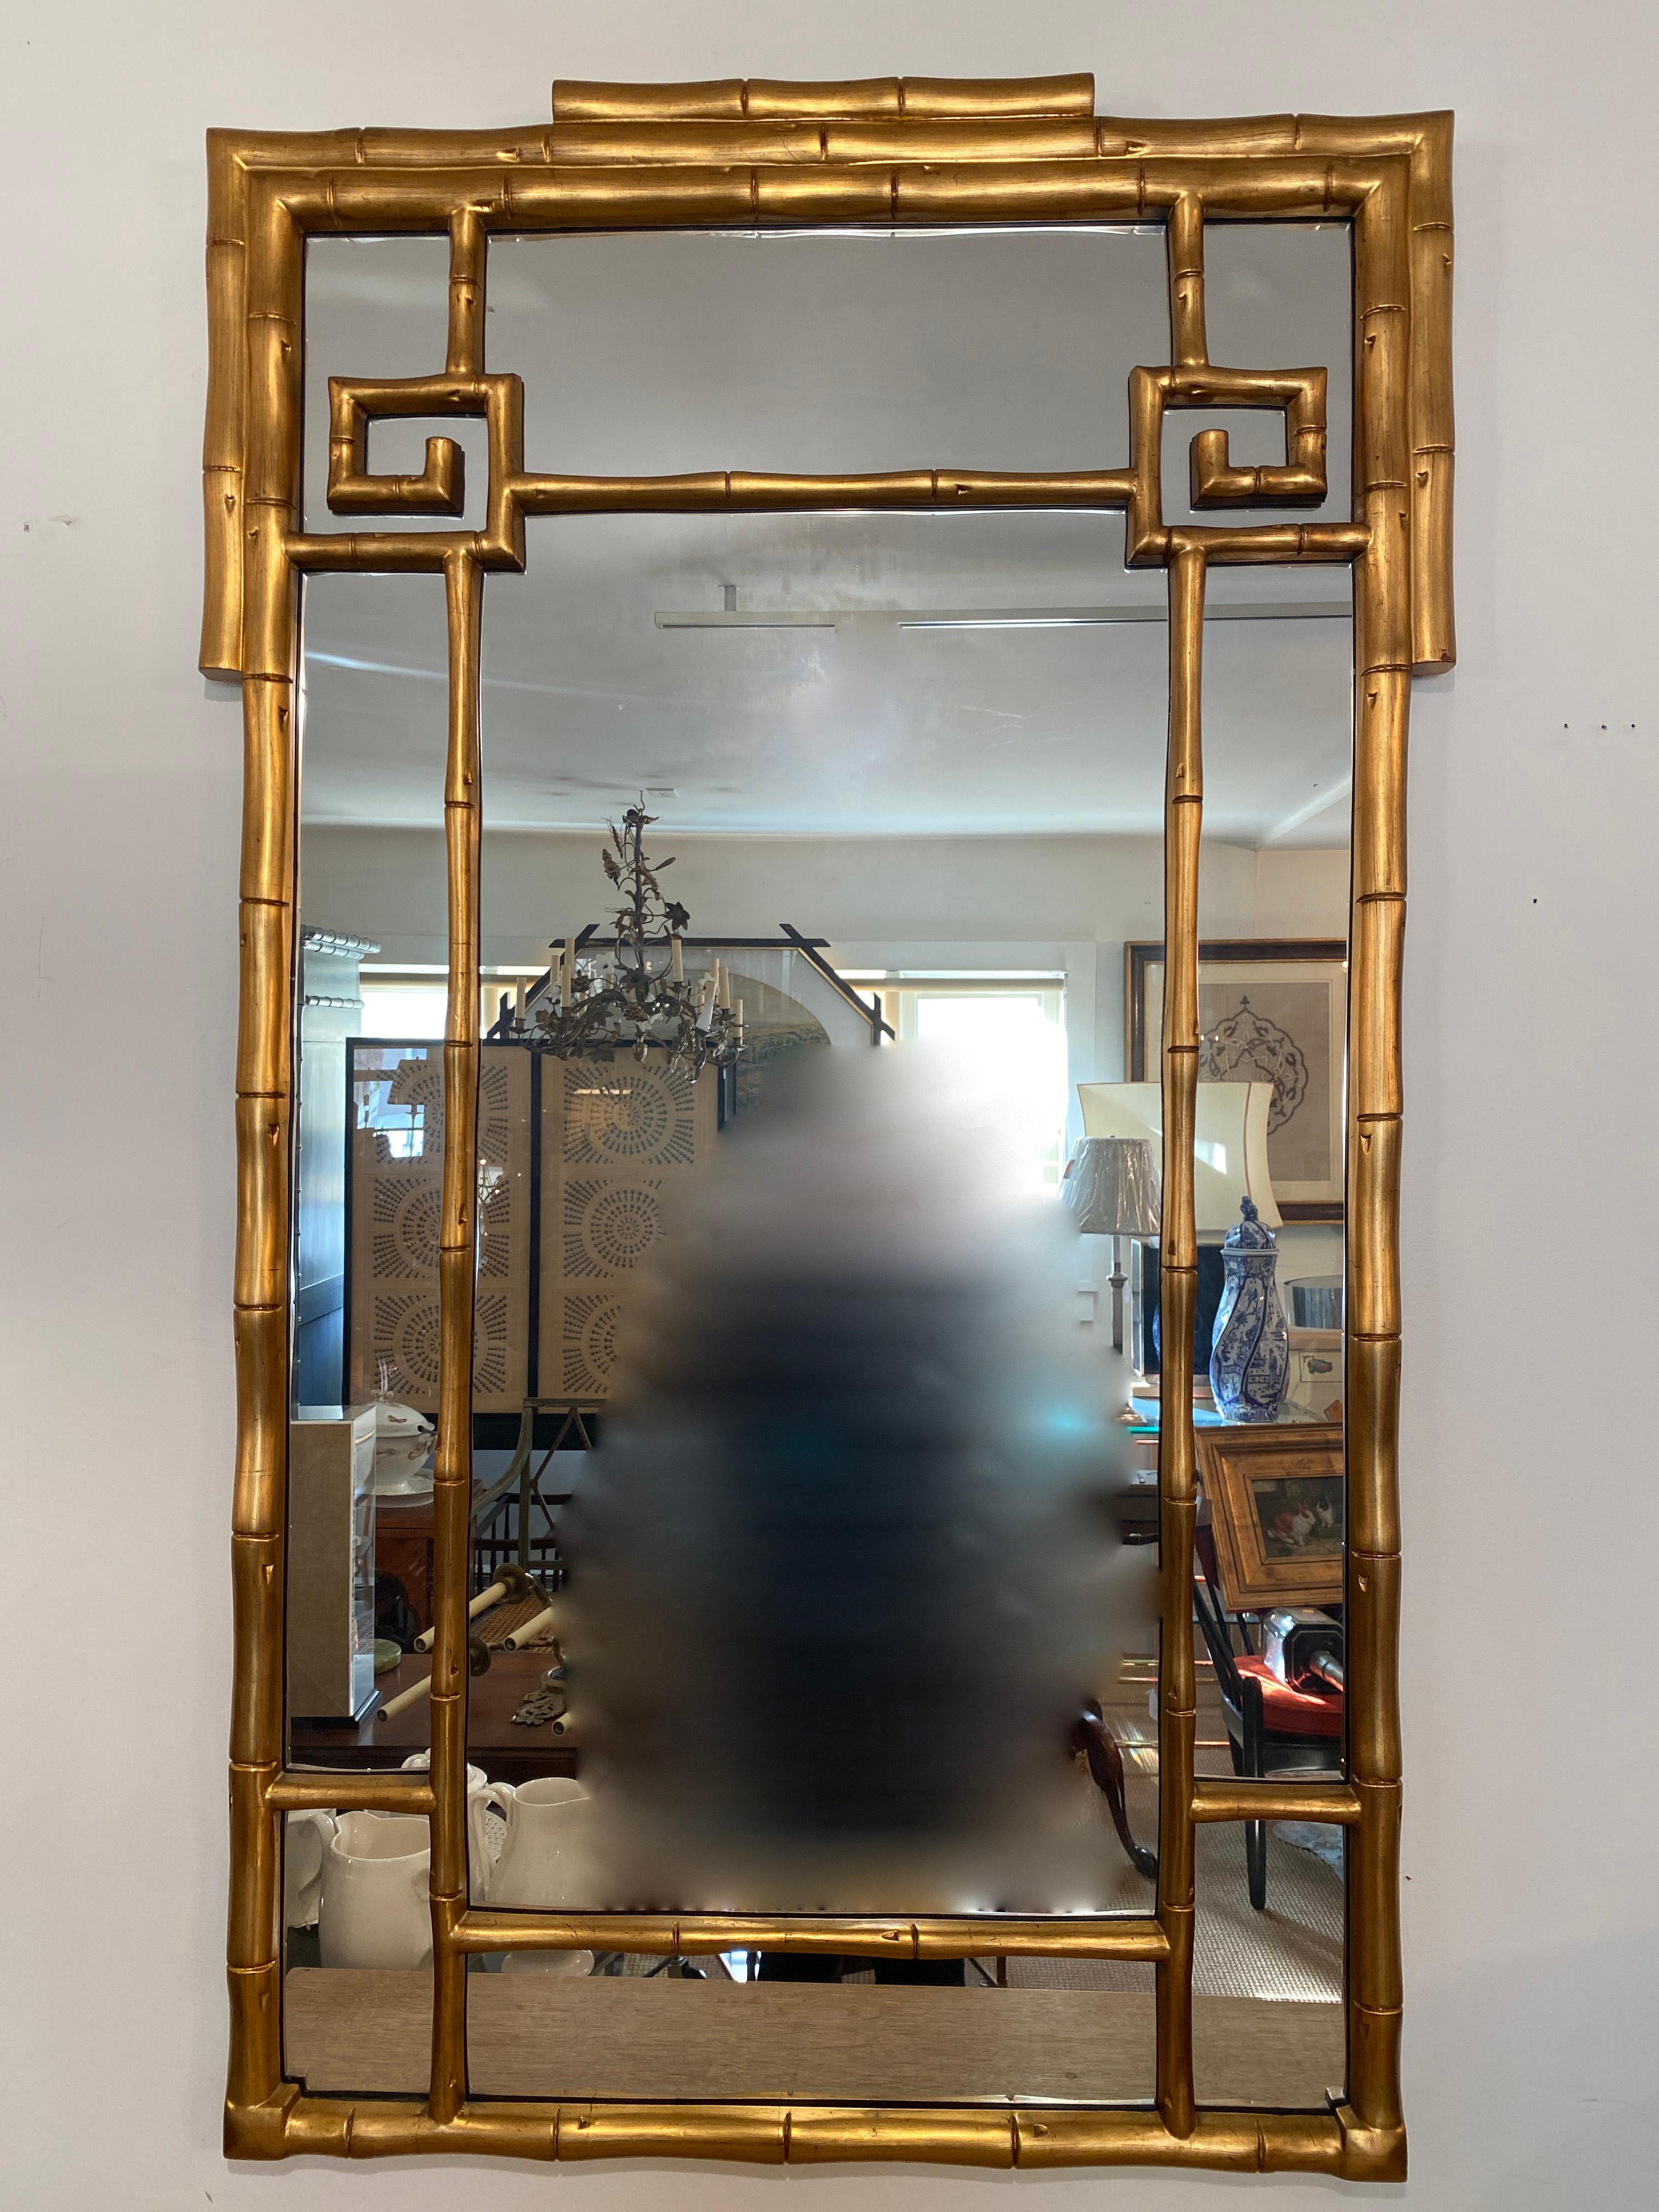 This generously sized wall mirror, featuring a faux bamboo frame and chinoiserie influence, adds a subtle touch of Chinese aesthetic to your decor. In superb vintage condition